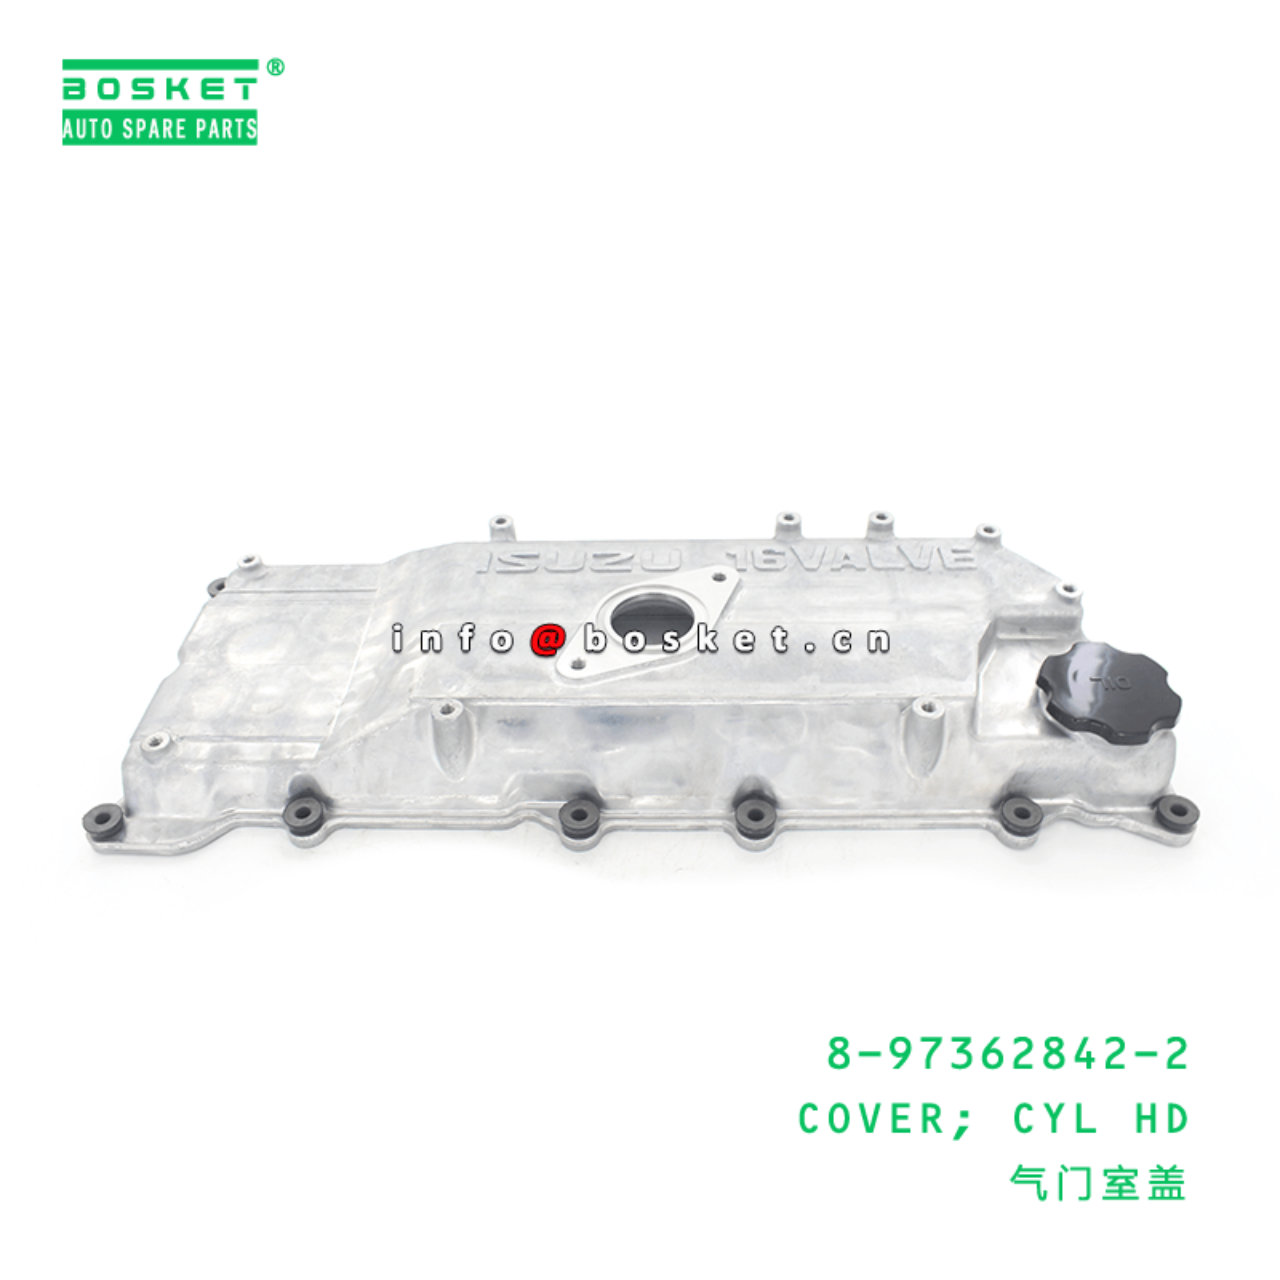 8-97362842-2 Cylinder Head Cover 8973628422 Suitable for ISUZU XD 4HK1